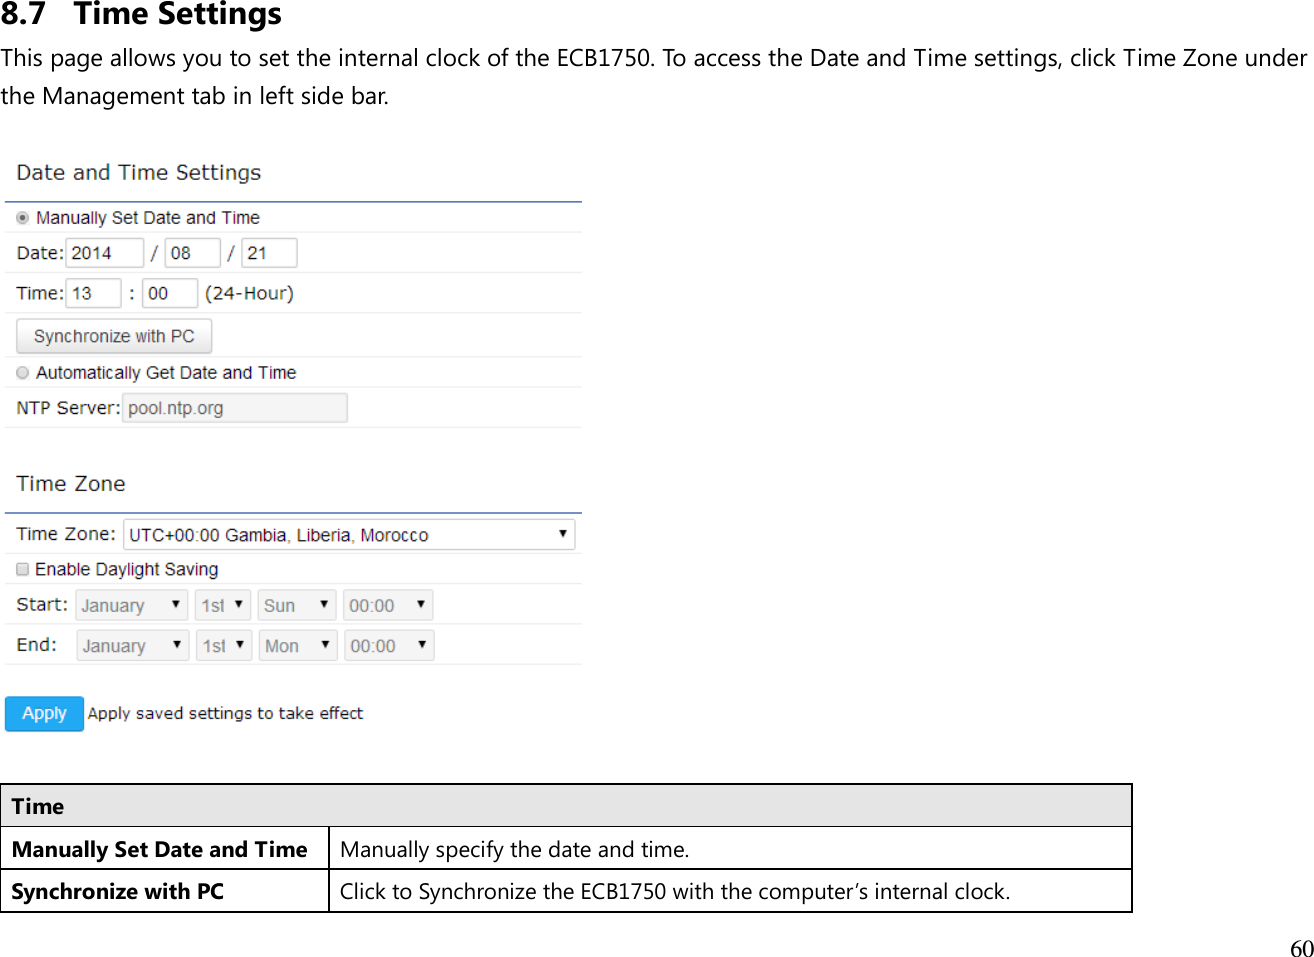  60  8.7 Time Settings This page allows you to set the internal clock of the ECB1750. To access the Date and Time settings, click Time Zone under the Management tab in left side bar.    Time Manually Set Date and Time Manually specify the date and time. Synchronize with PC Click to Synchronize the ECB1750 with the computer’s internal clock. 